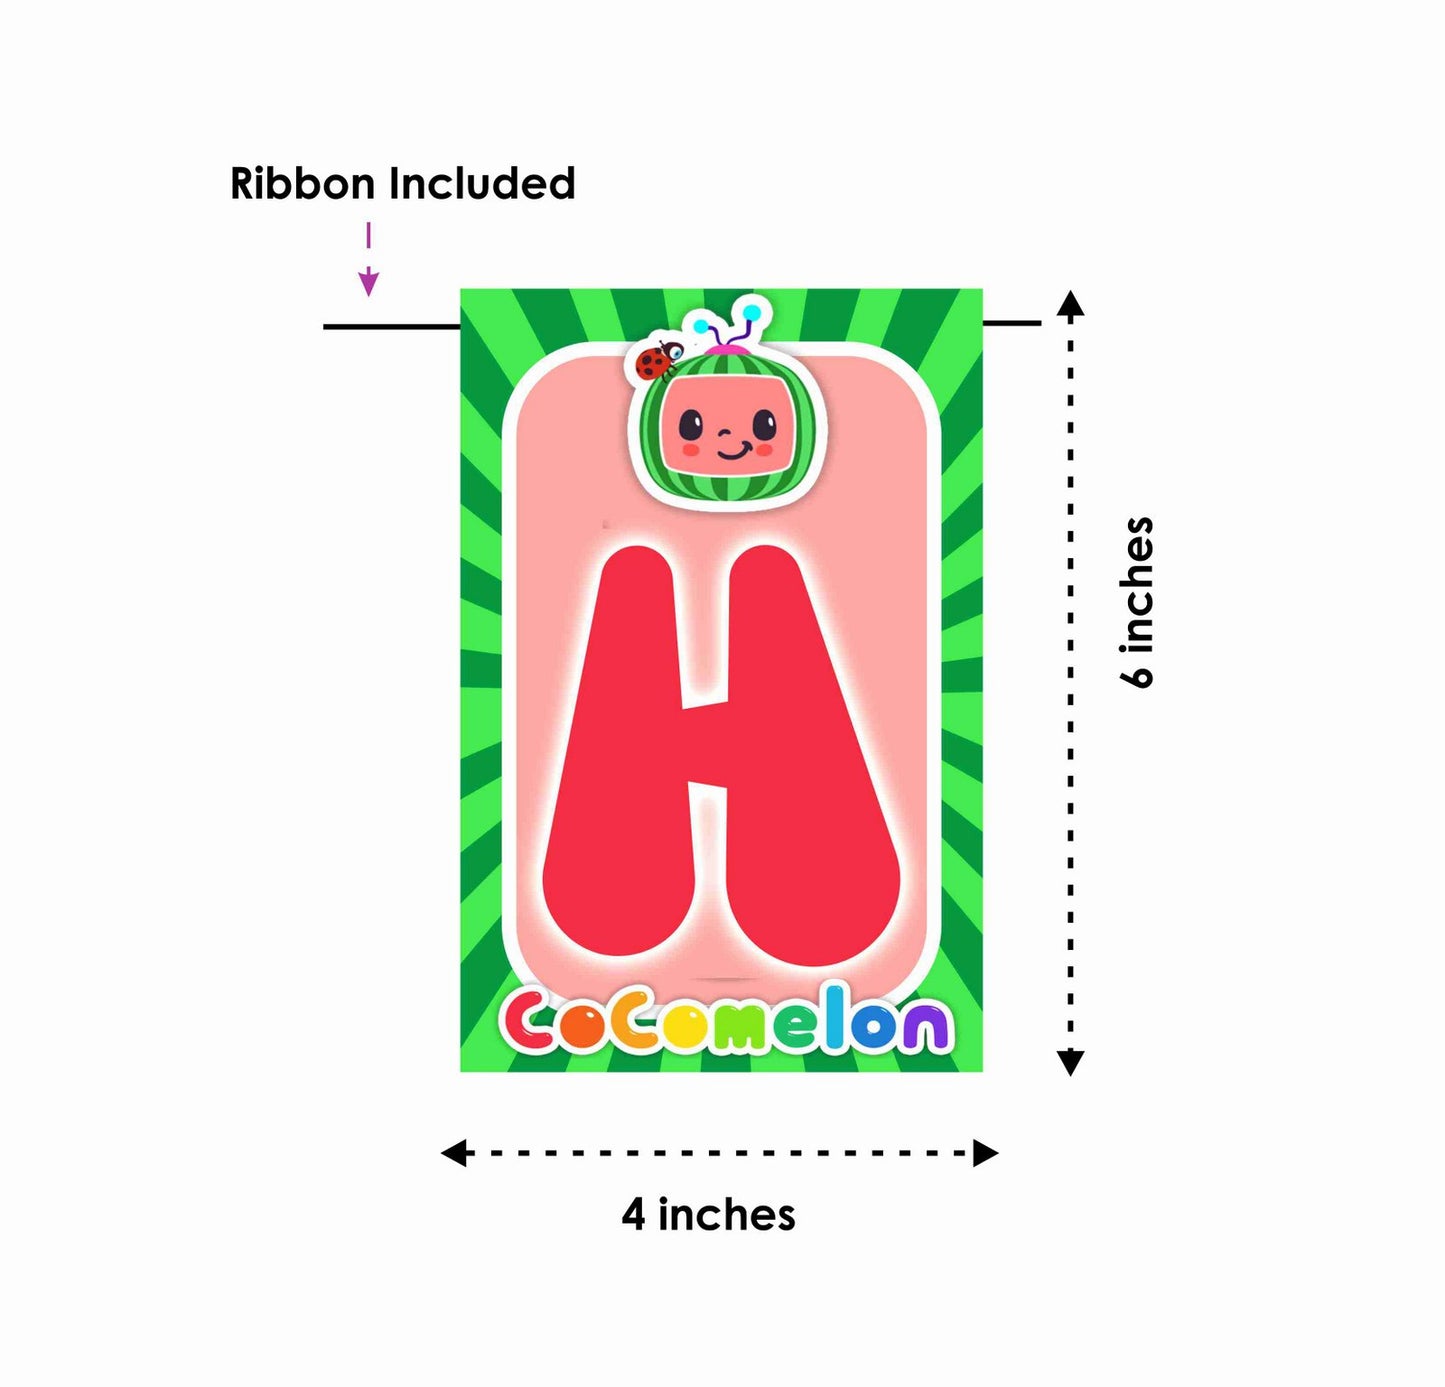 Cocomelon Theme Happy Birthday Decoration Hanging and Banner for Photo Shoot Backdrop and Theme Party